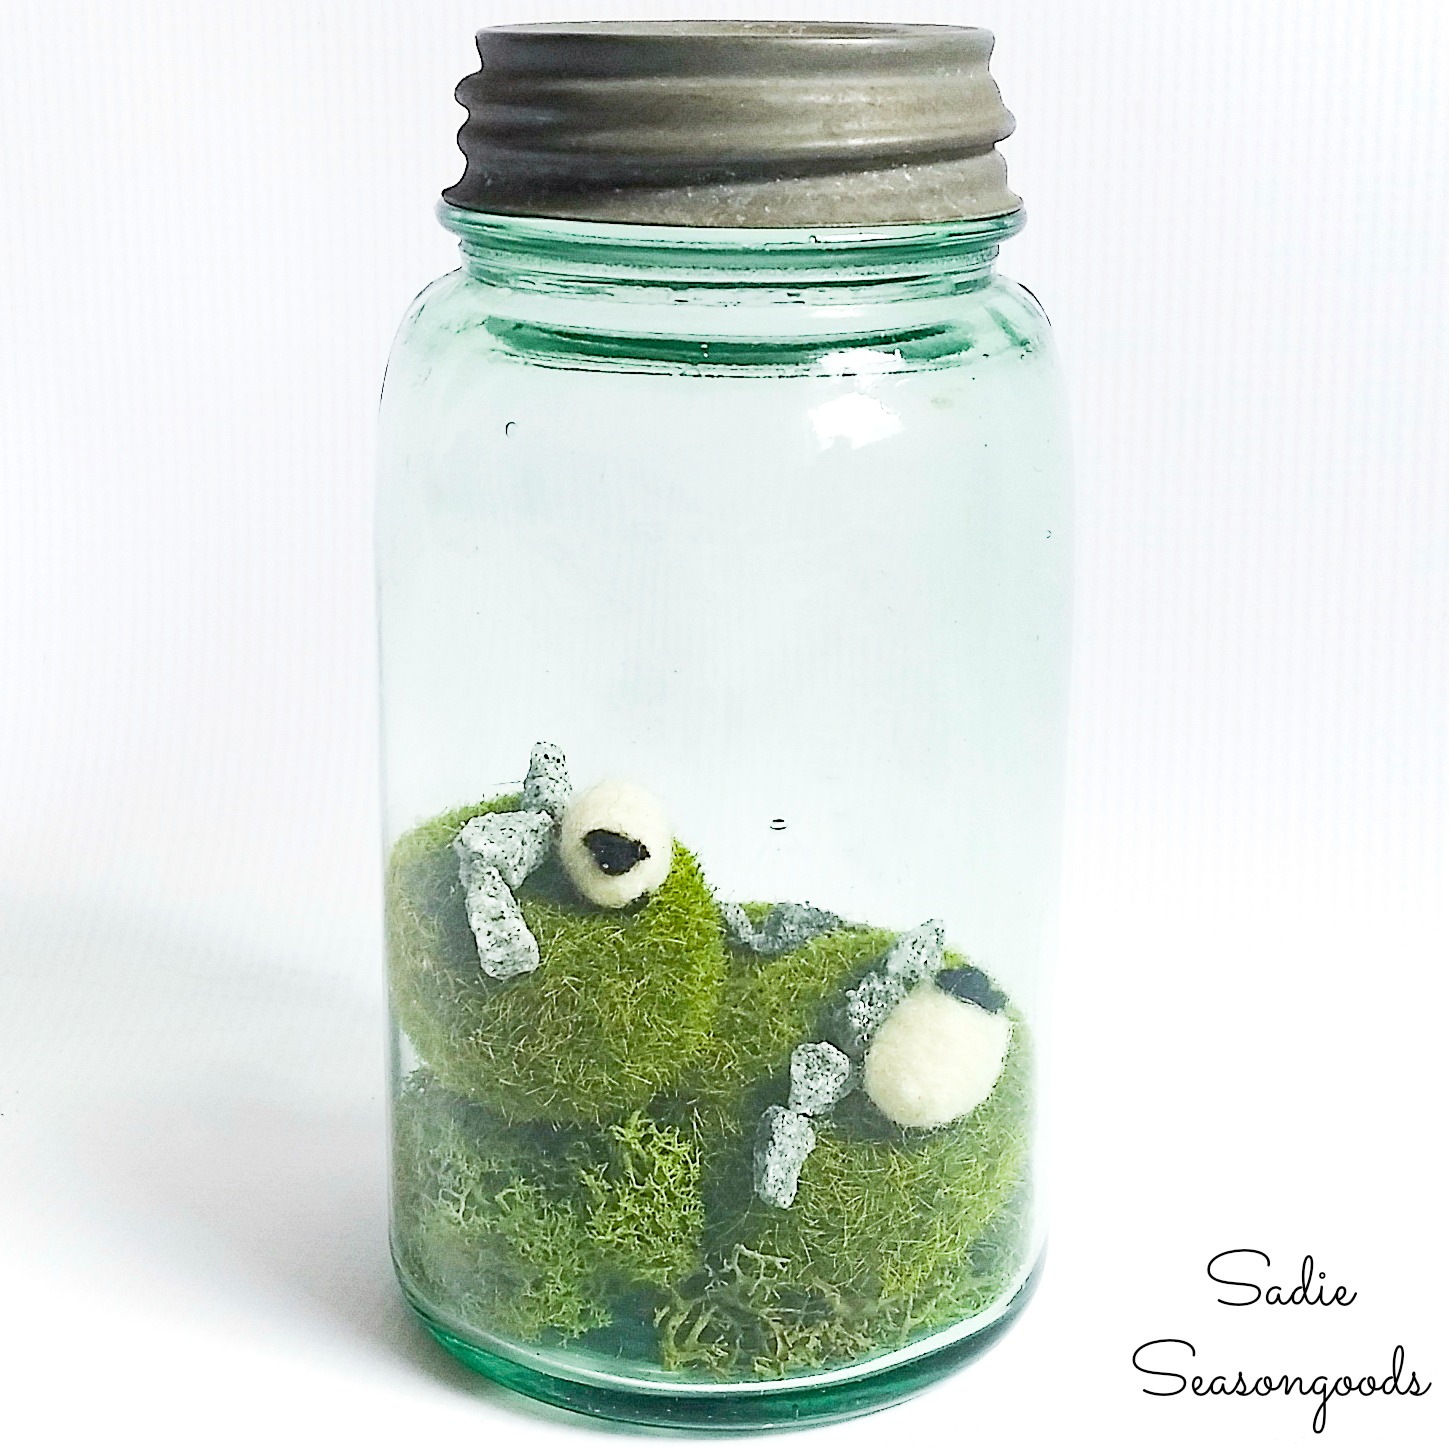 St. Patrick's Day Crafts for Kids - Irish Home Decor in a Green Jar